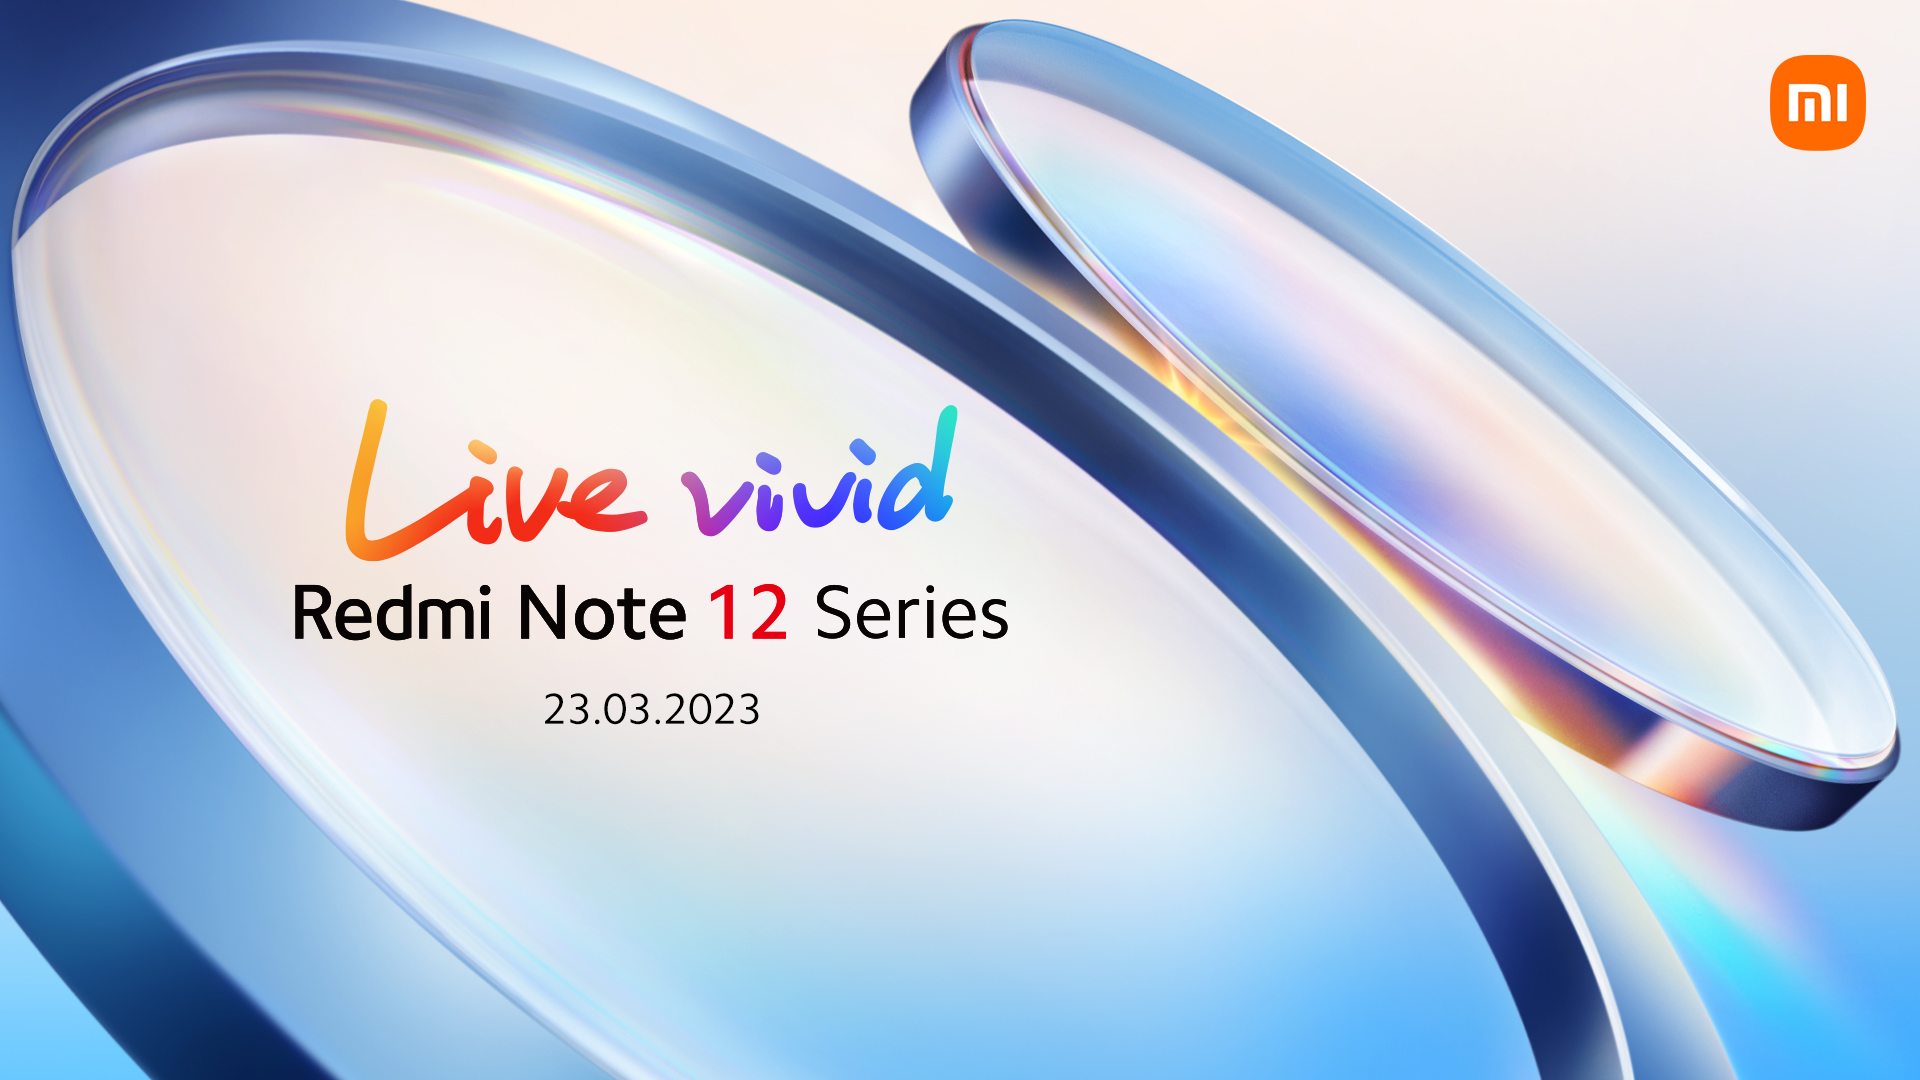 It's official: Xiaomi will launch the Redmi Note 12 range of smartphones on the global market on March 23